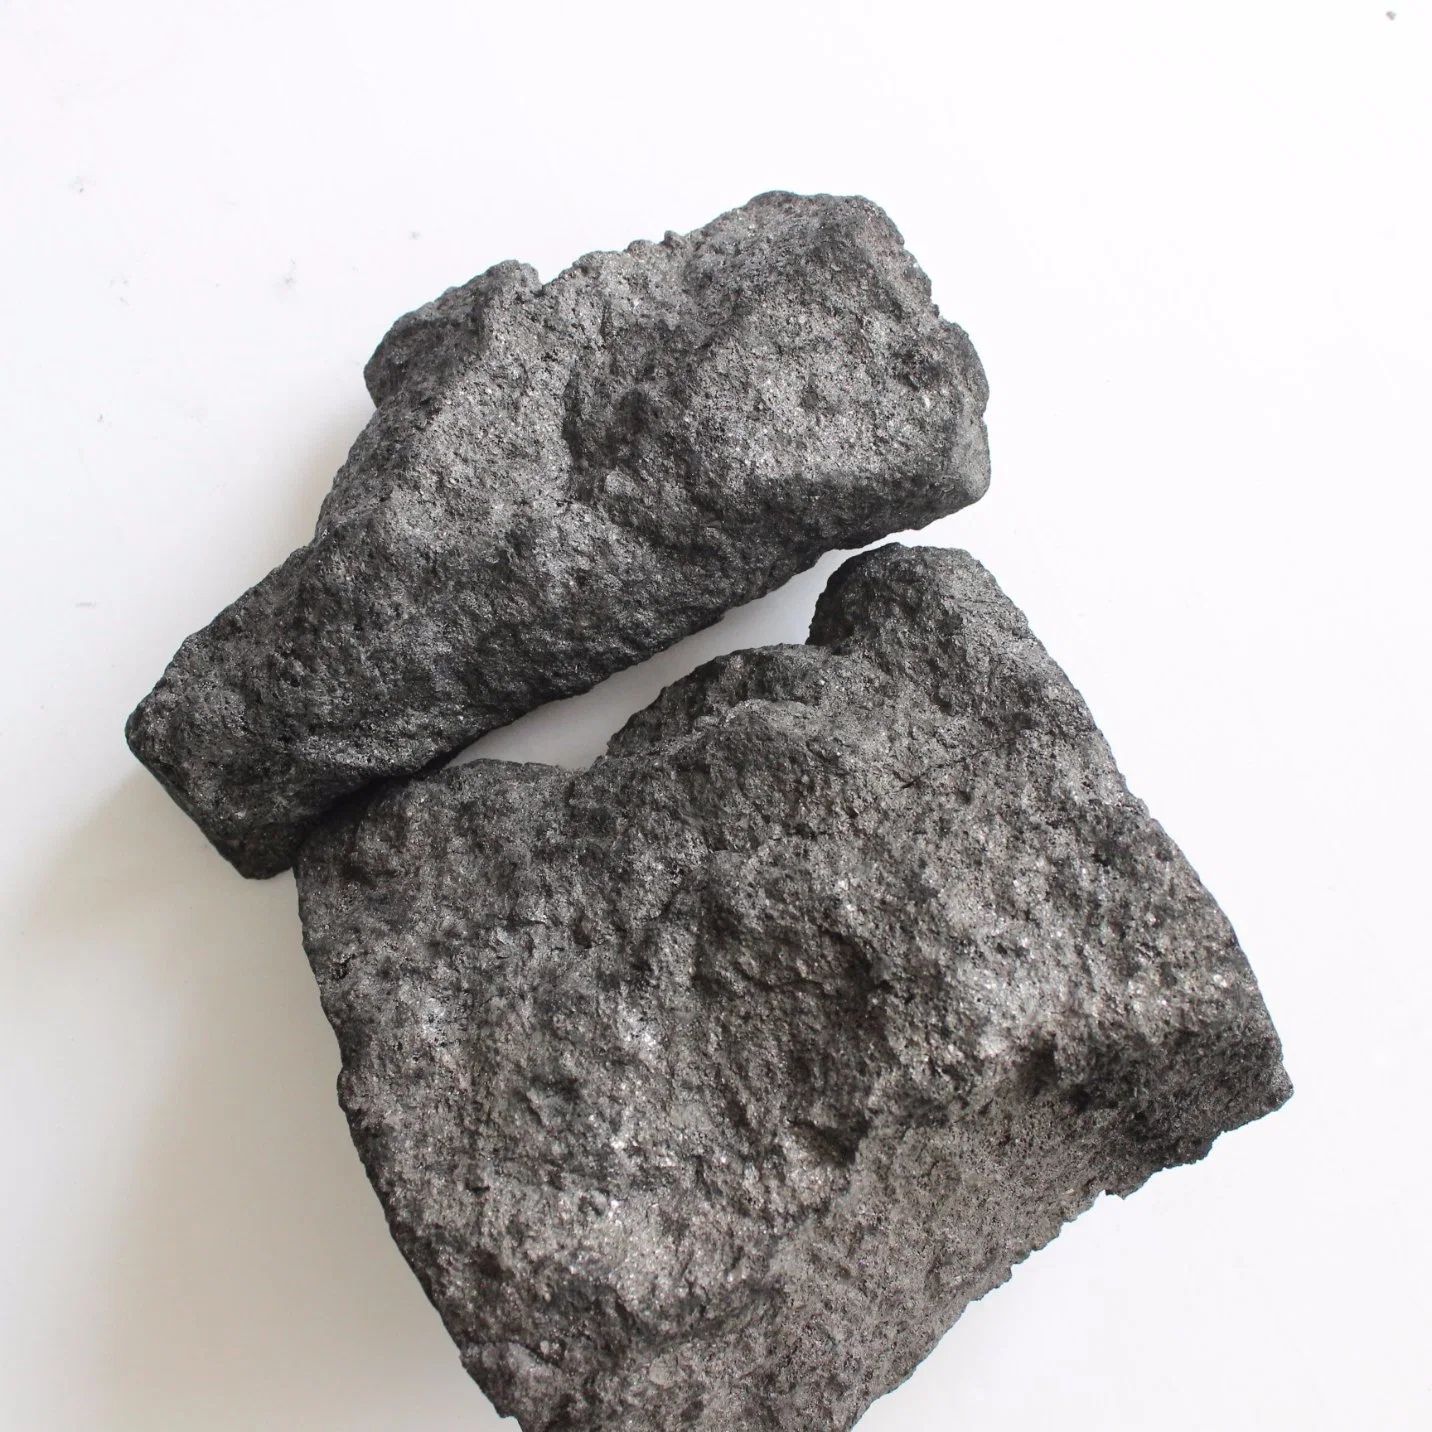 Metallurgical Coke Price Fob Reference Calcined Petroleum Coke